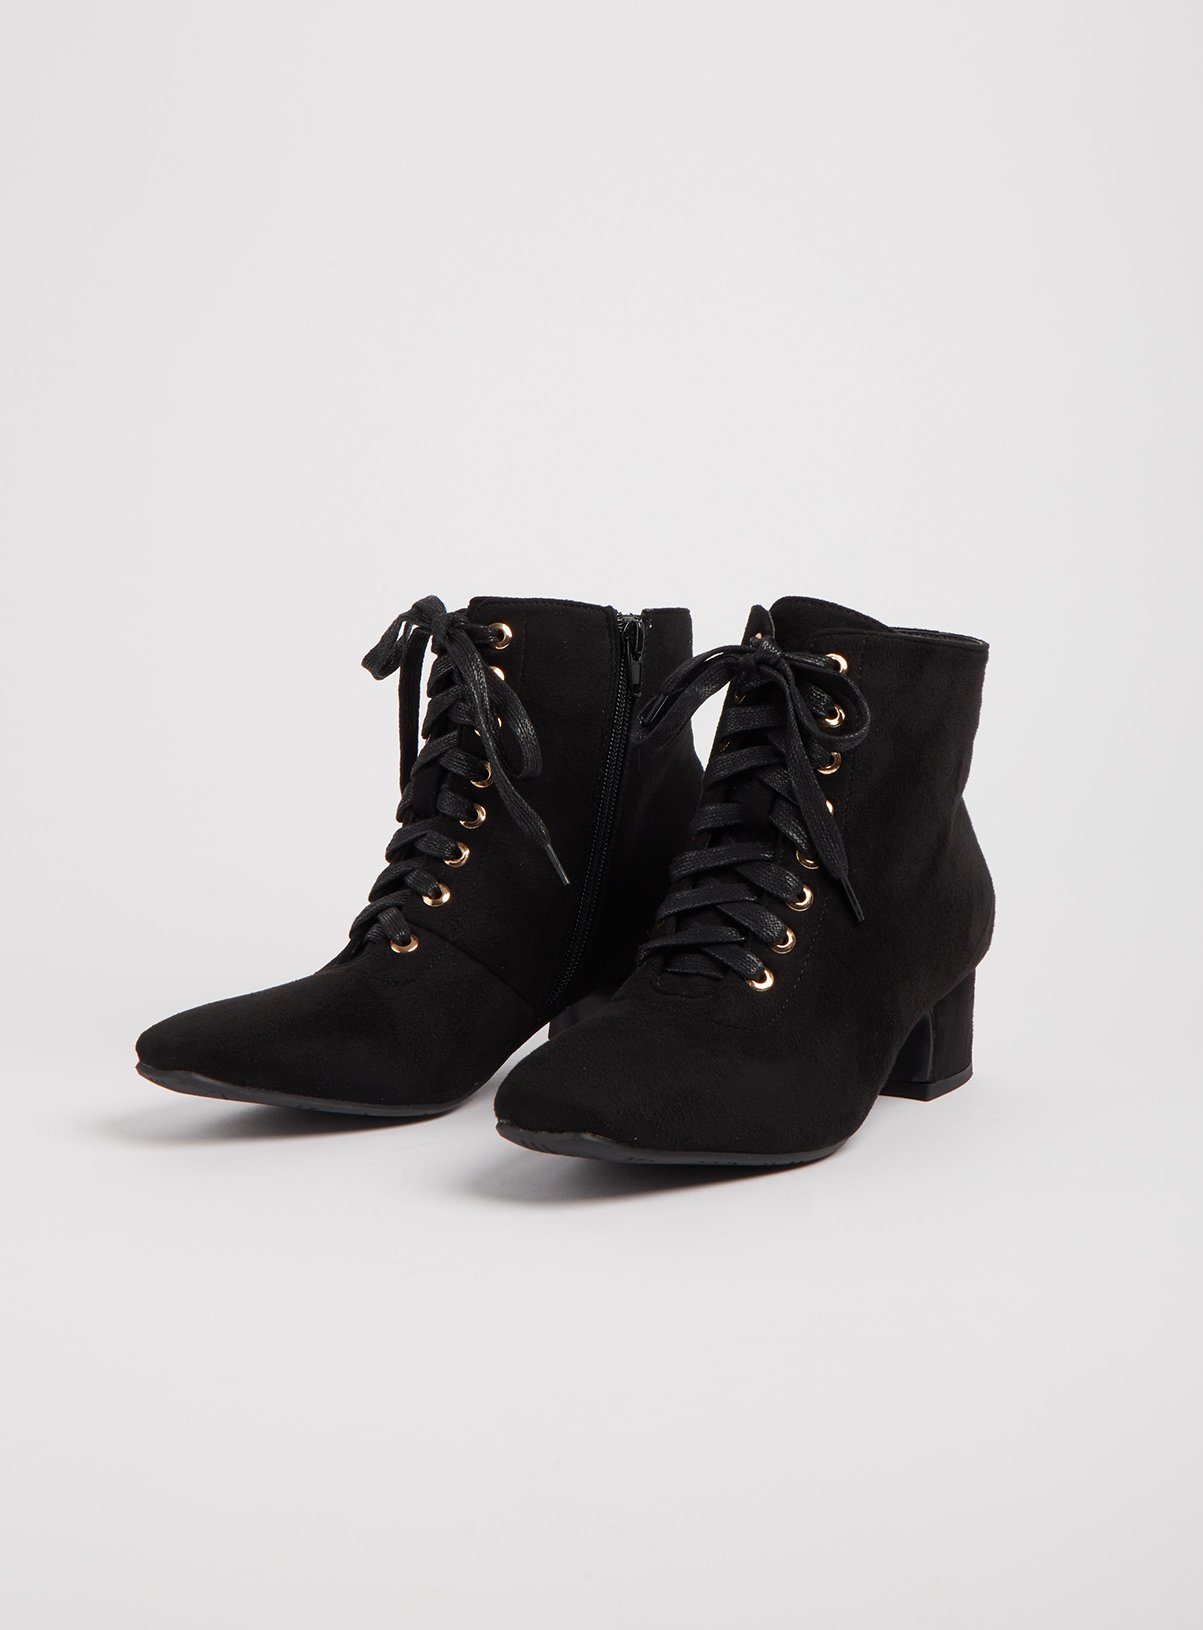 black ankle boots jcpenney